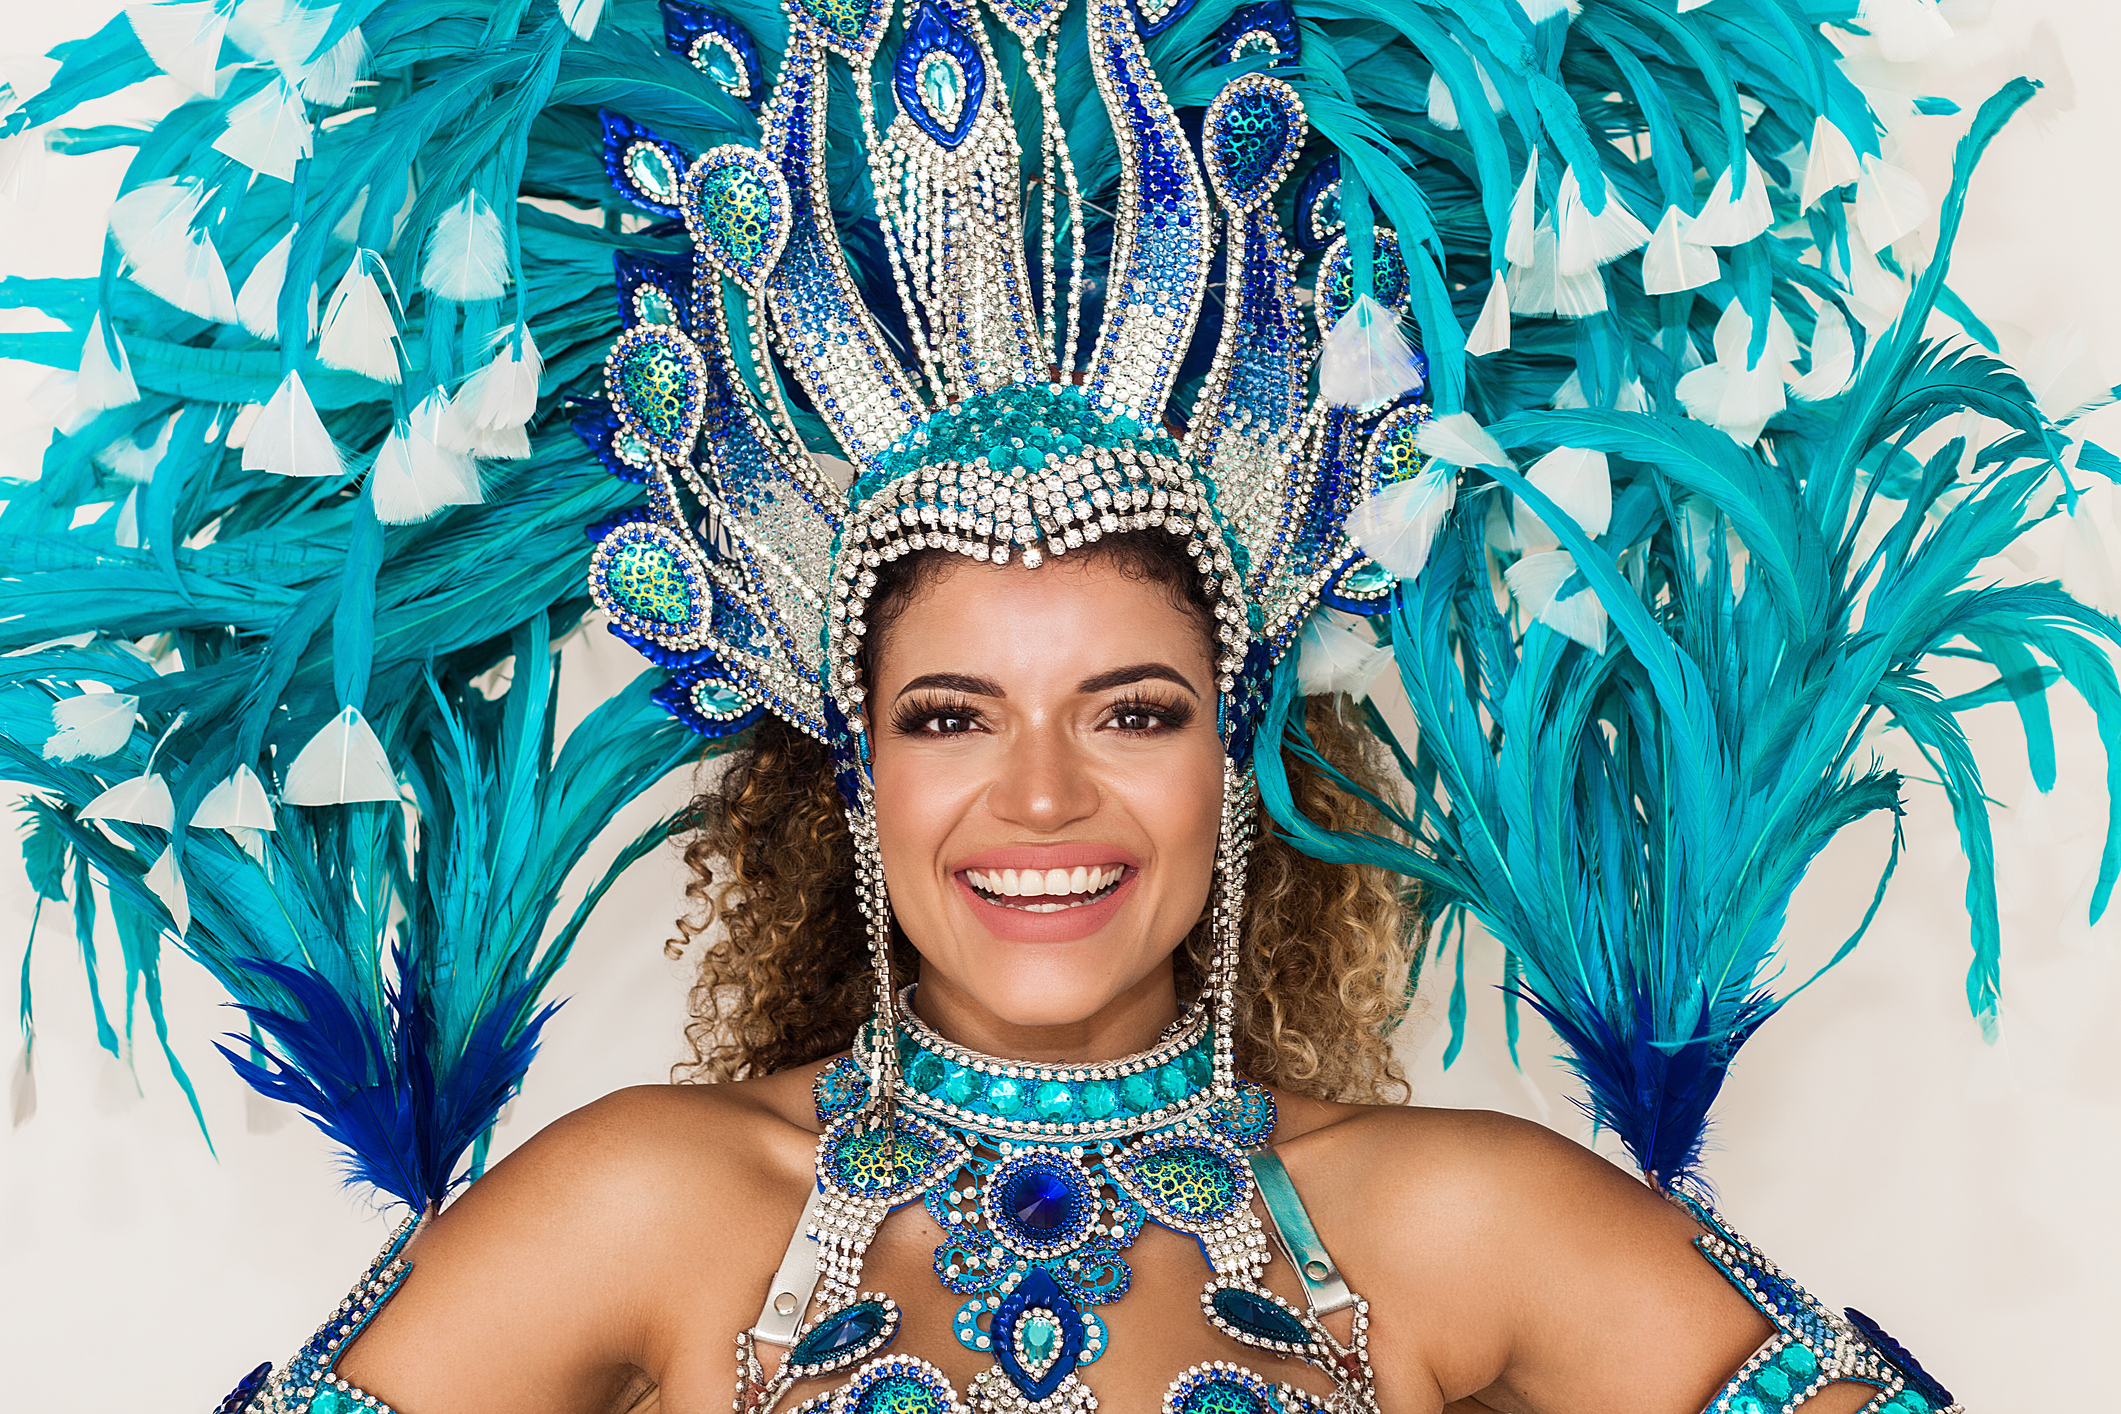 Experience Rio's world-famous Carnival!